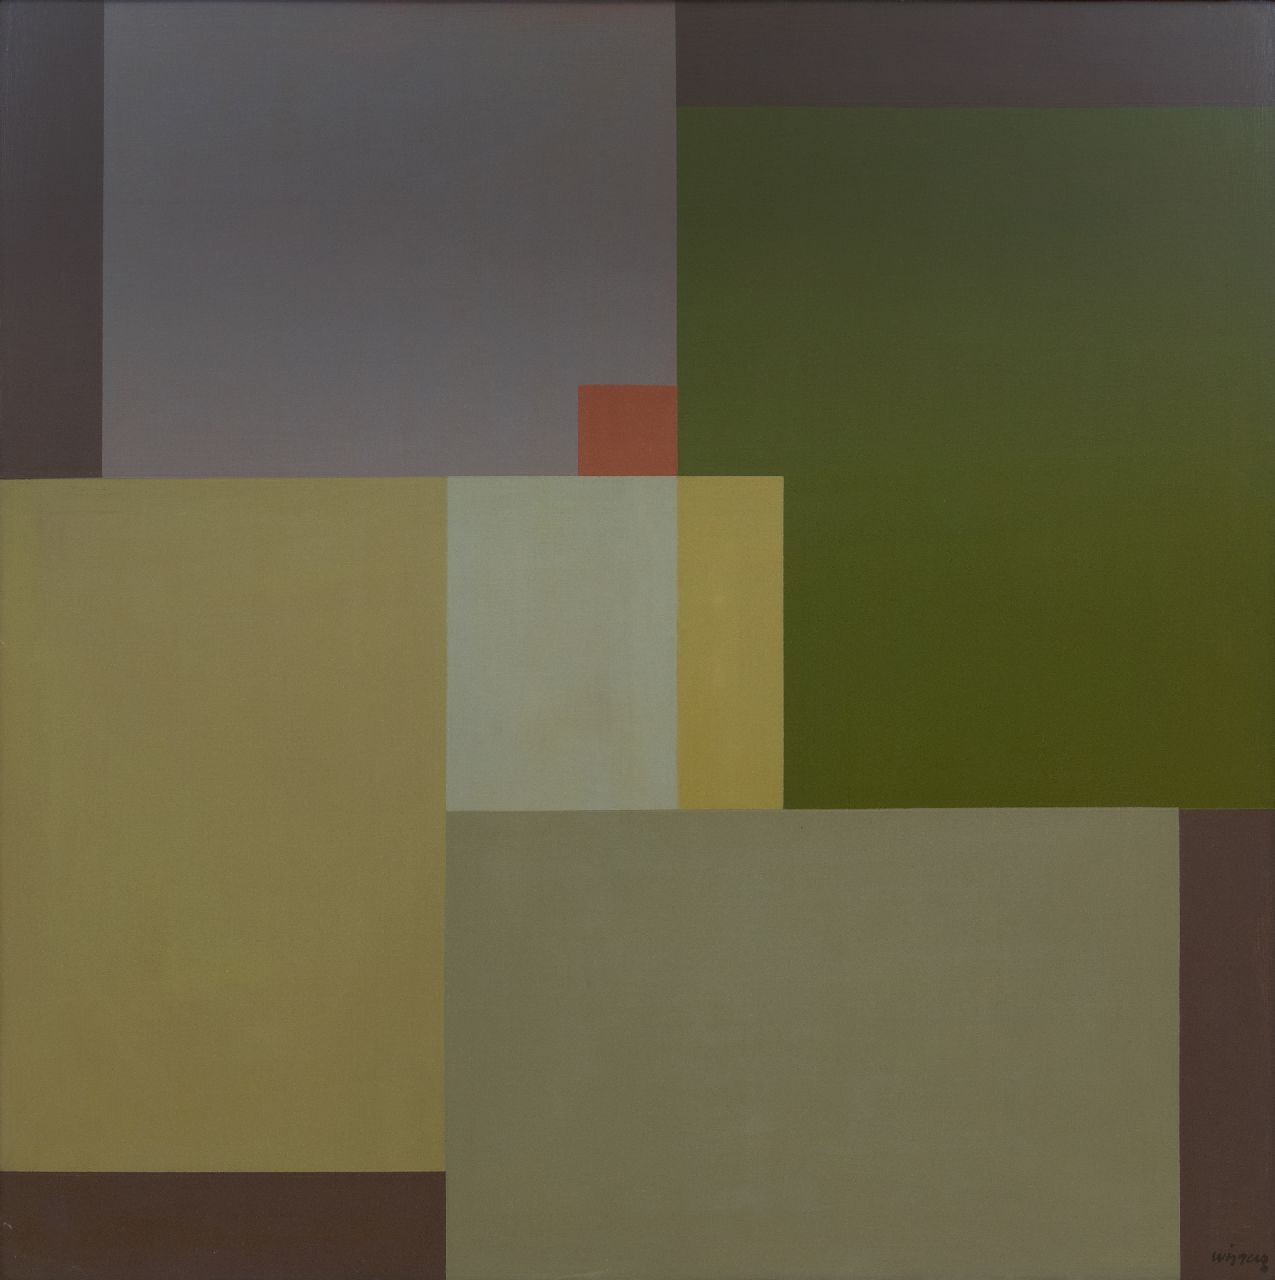 Wiggers K.H.  | 'Karel' Hendrik Wiggers | Paintings offered for sale | Composition II, oil on panel 79.0 x 79.0 cm, signed l.r. and dated on the reverse '88